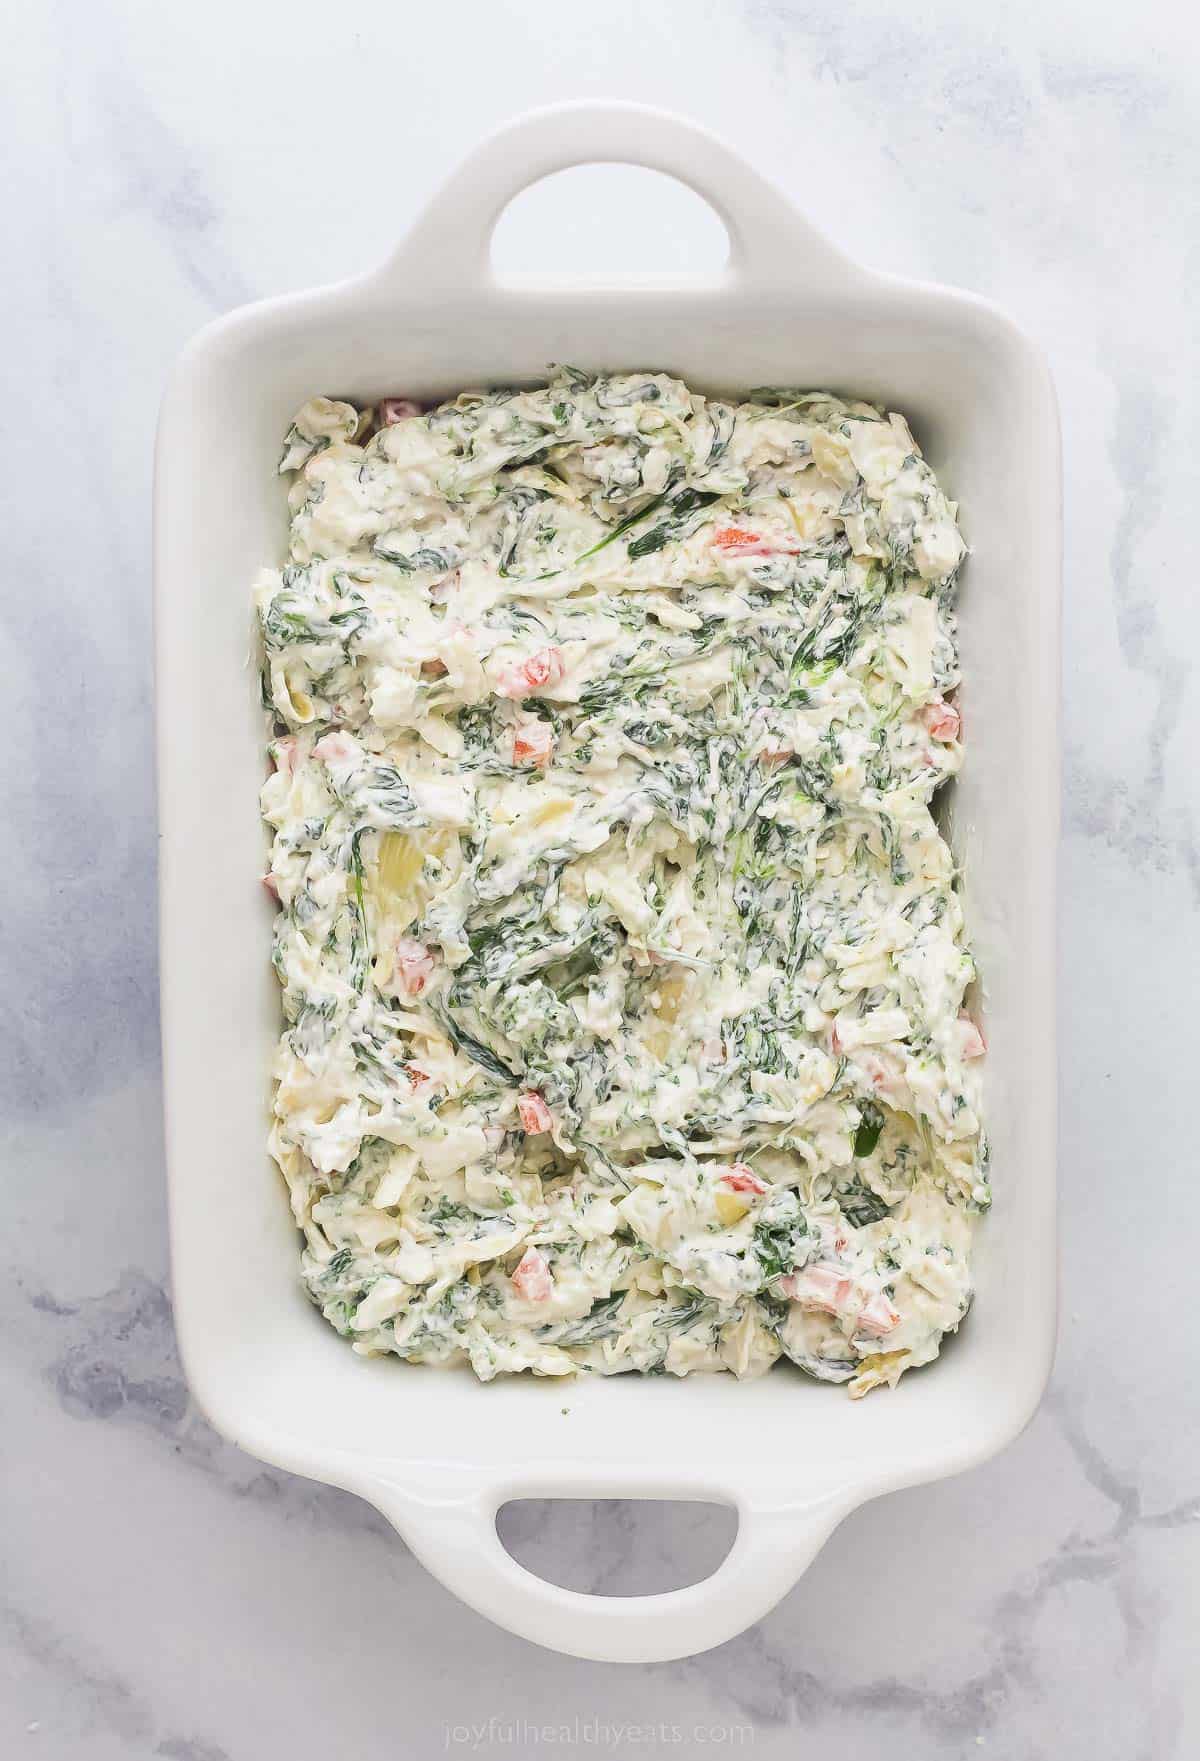 a casserole dish with uncooked crreamy spinach and artichoke dip